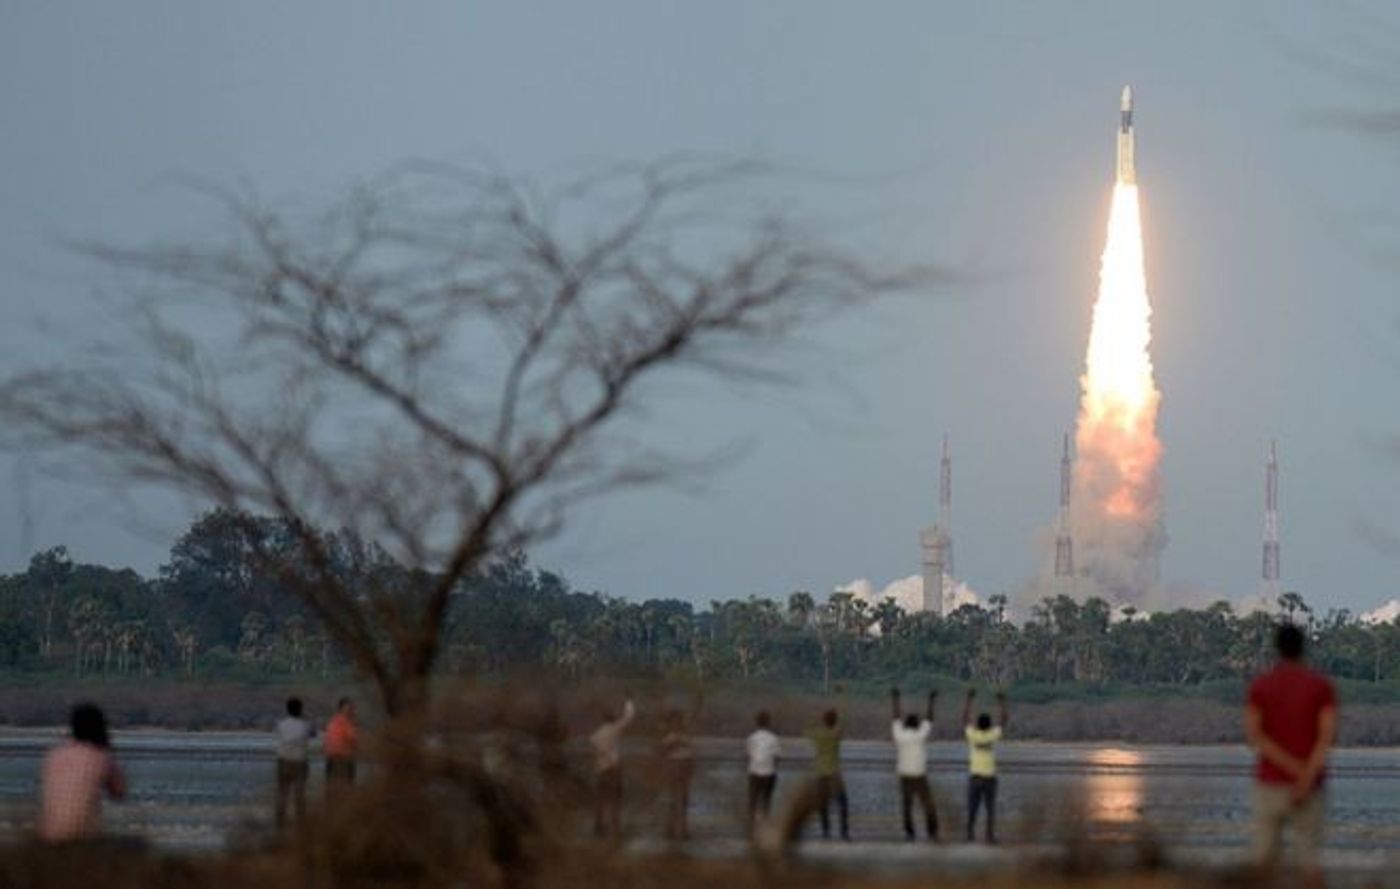 India's largest rocket launches from the pad.